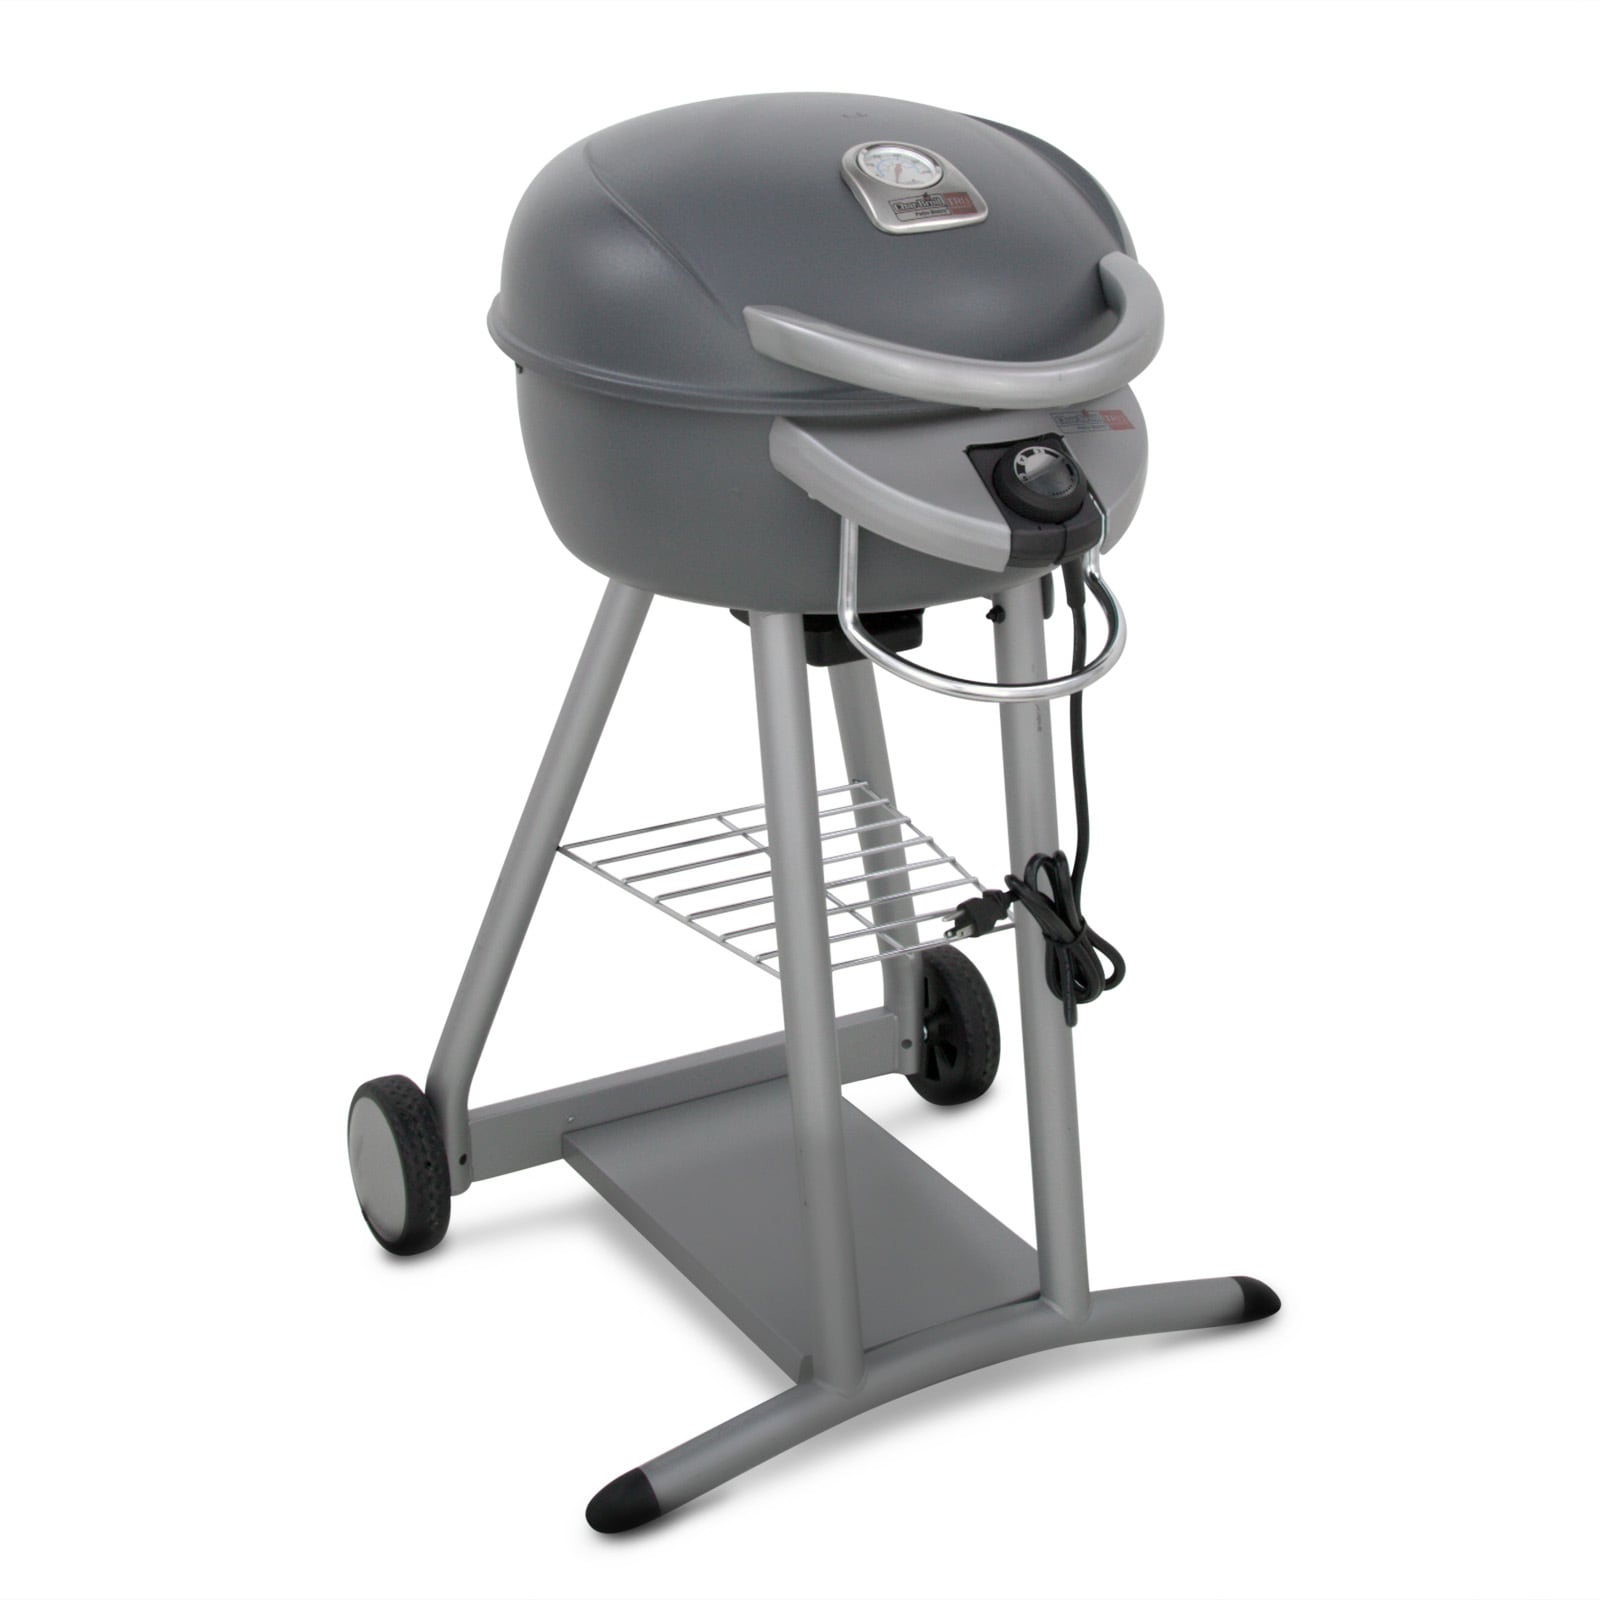 Charcoal grill home depot Outdoor Grills